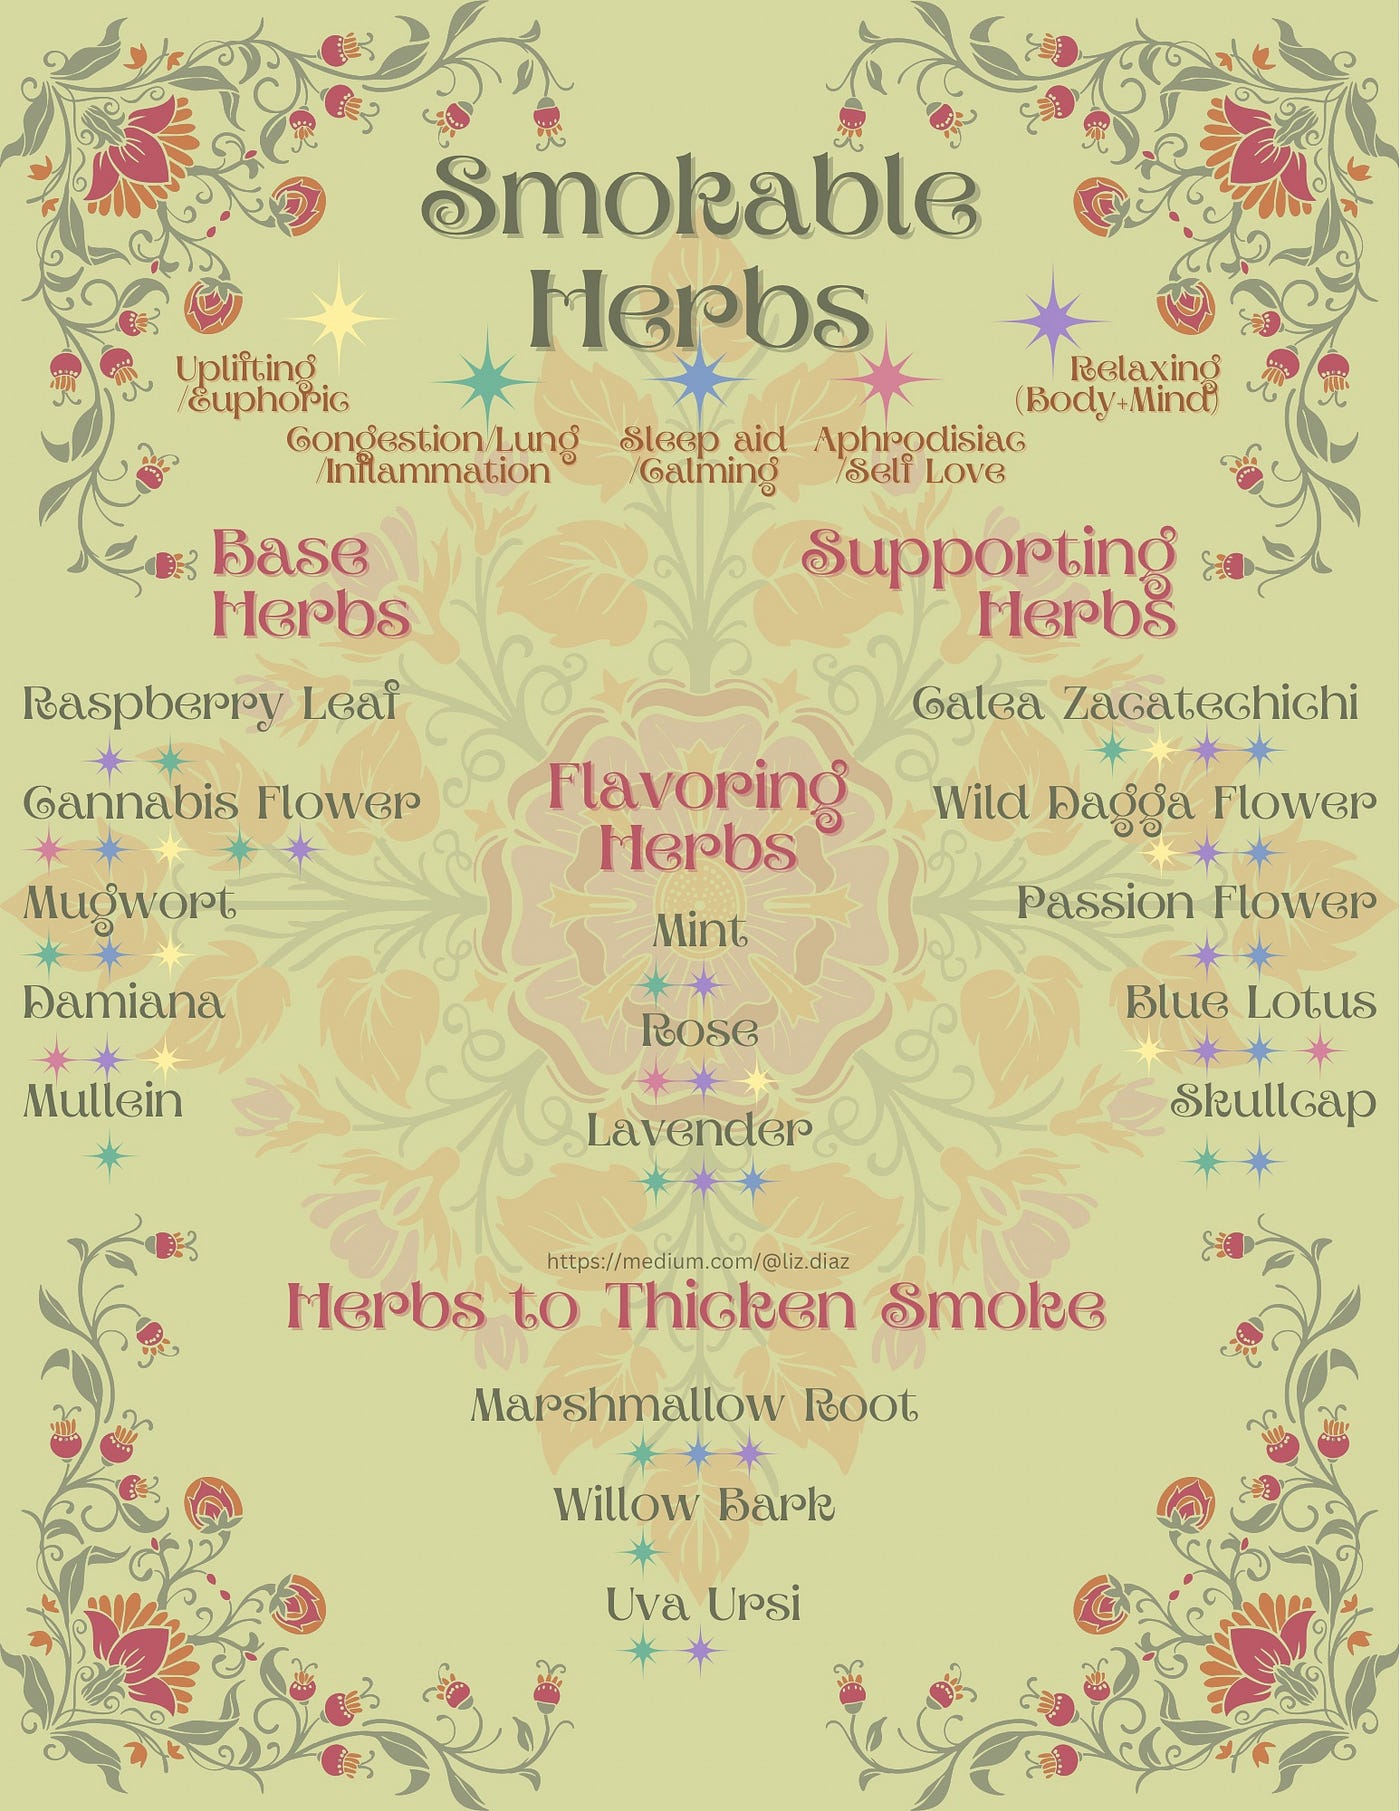 16 Smokable Herbs + Guide on How to Make Your Own Herbal Blends